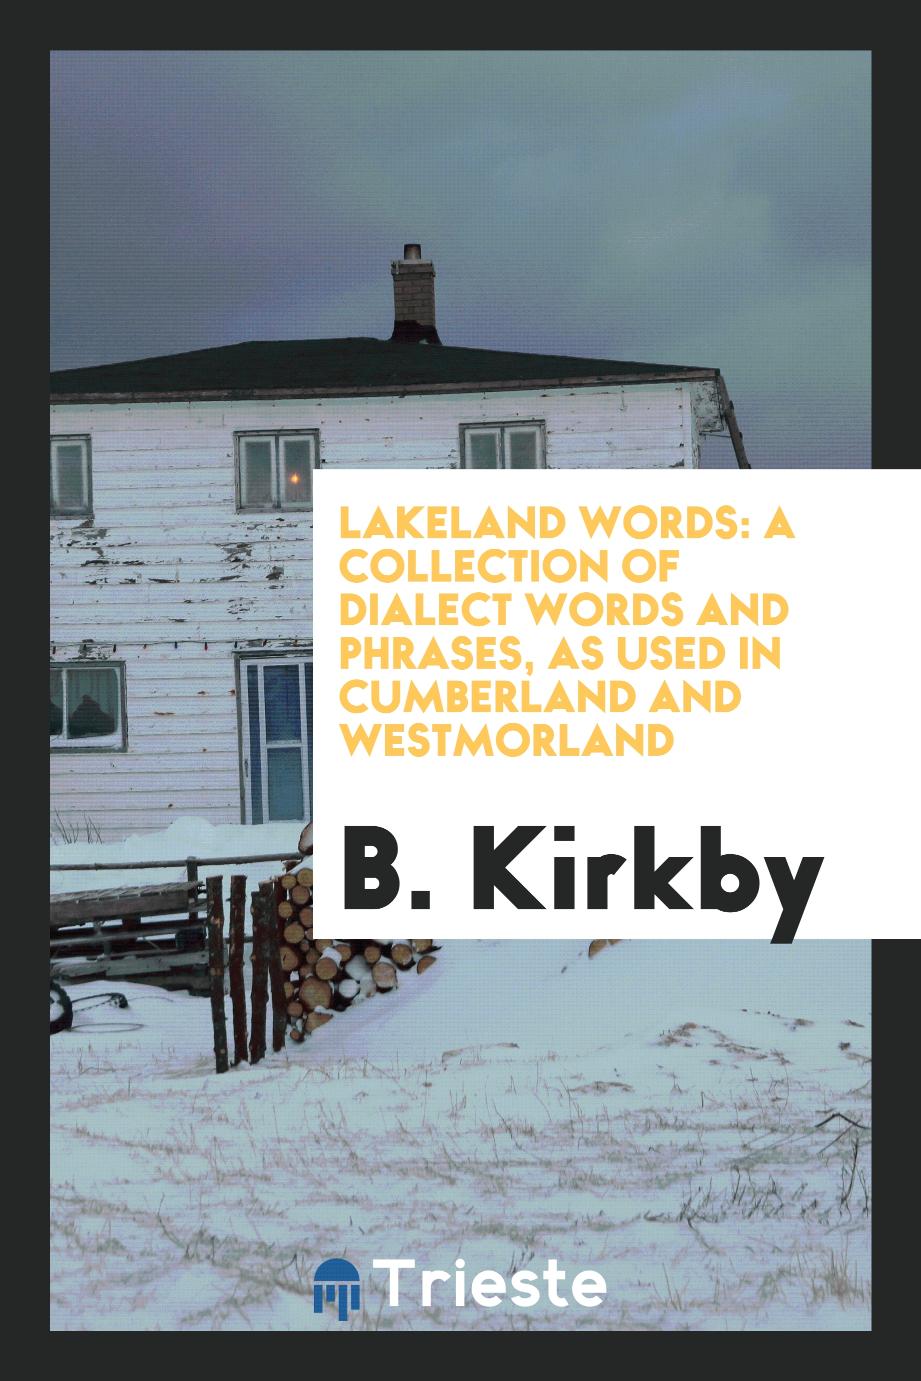 Lakeland Words: A Collection of Dialect Words and Phrases, as Used in Cumberland and Westmorland